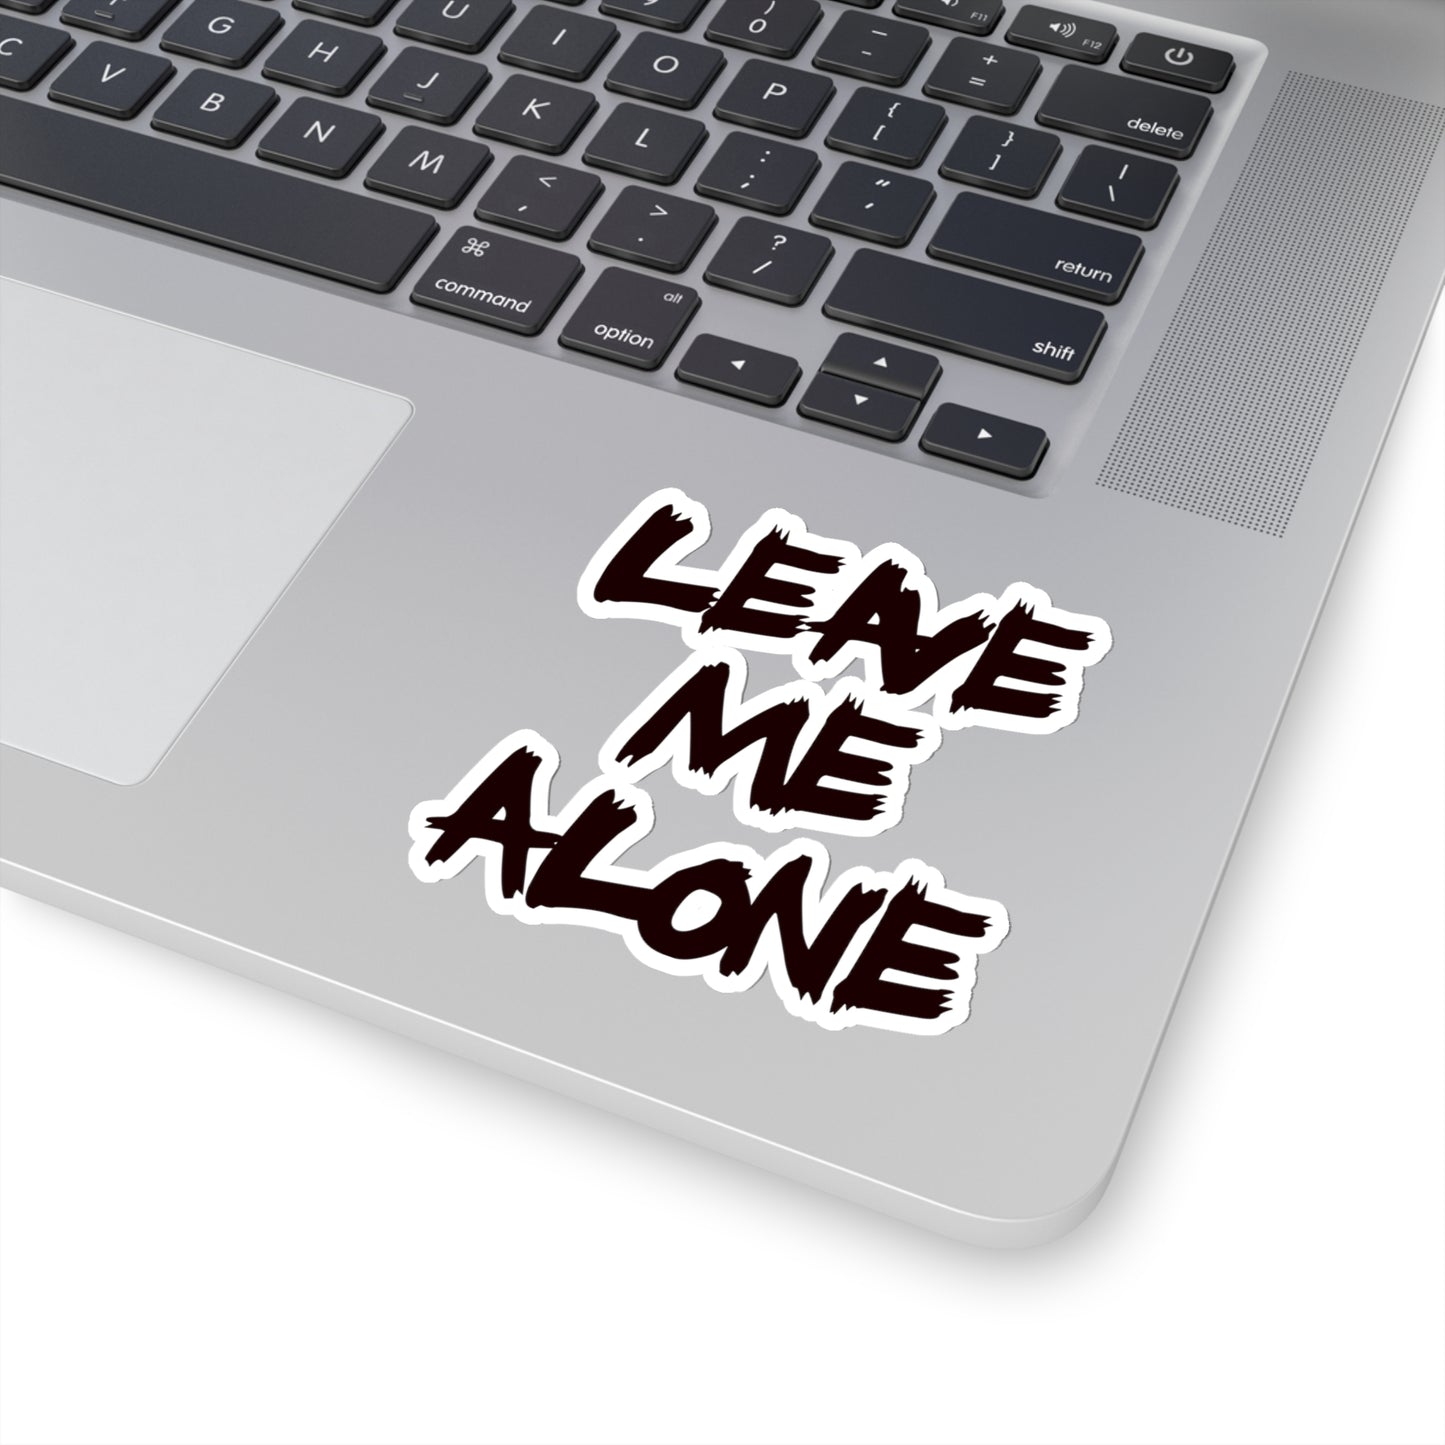 Leave me Alone - Kiss-Cut Stickers